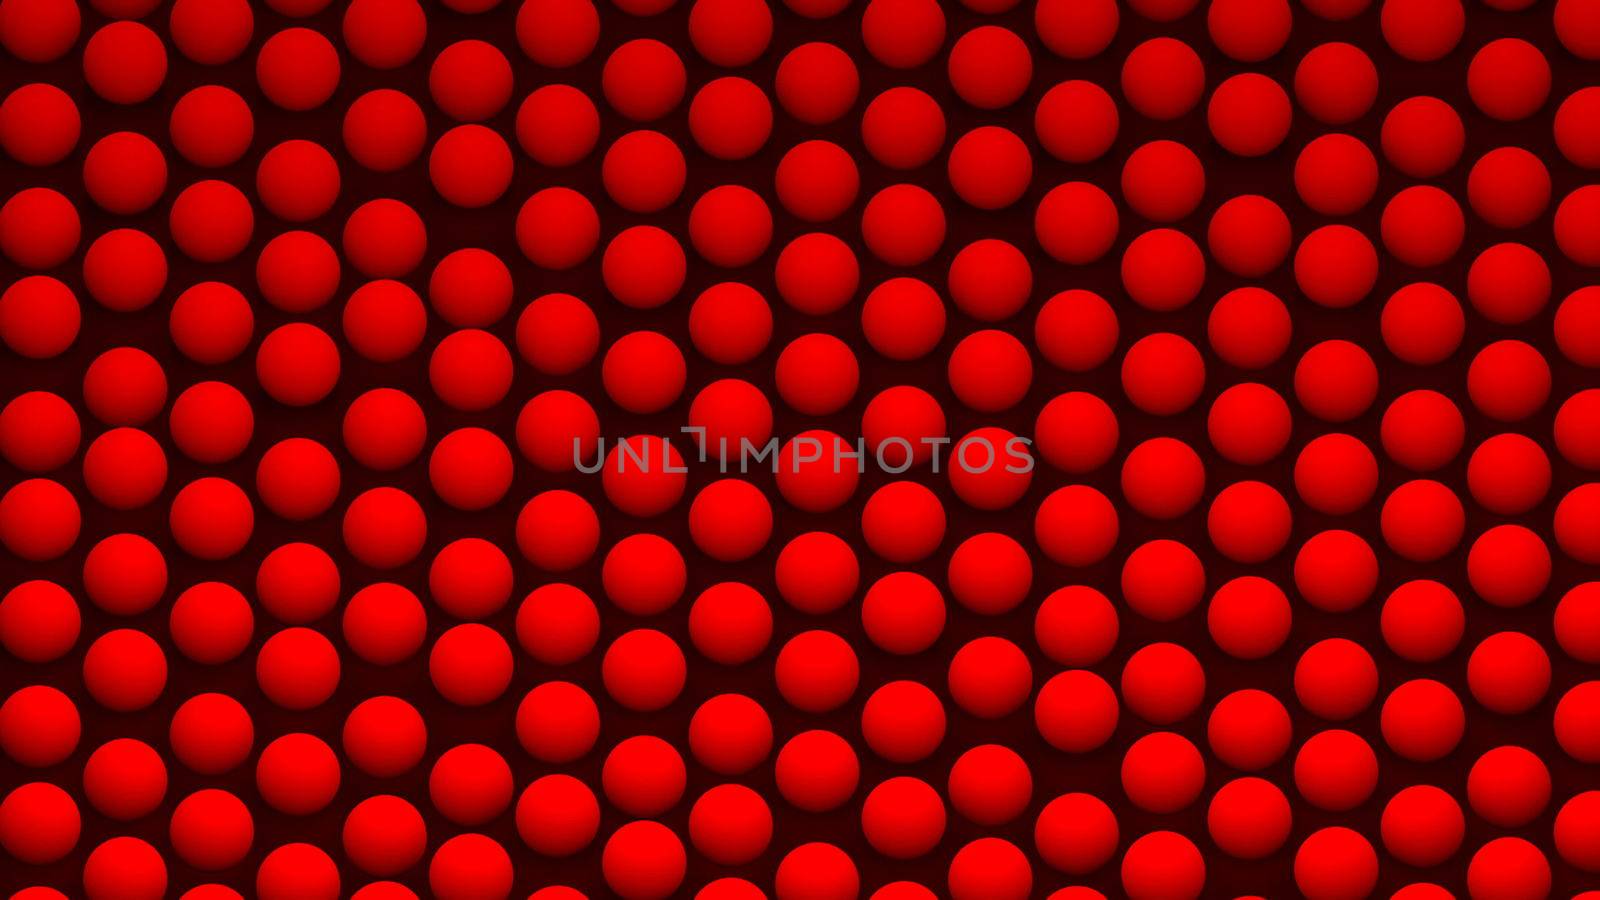 Abstract background with isometric spheres on surface, many objects, 3d rendering